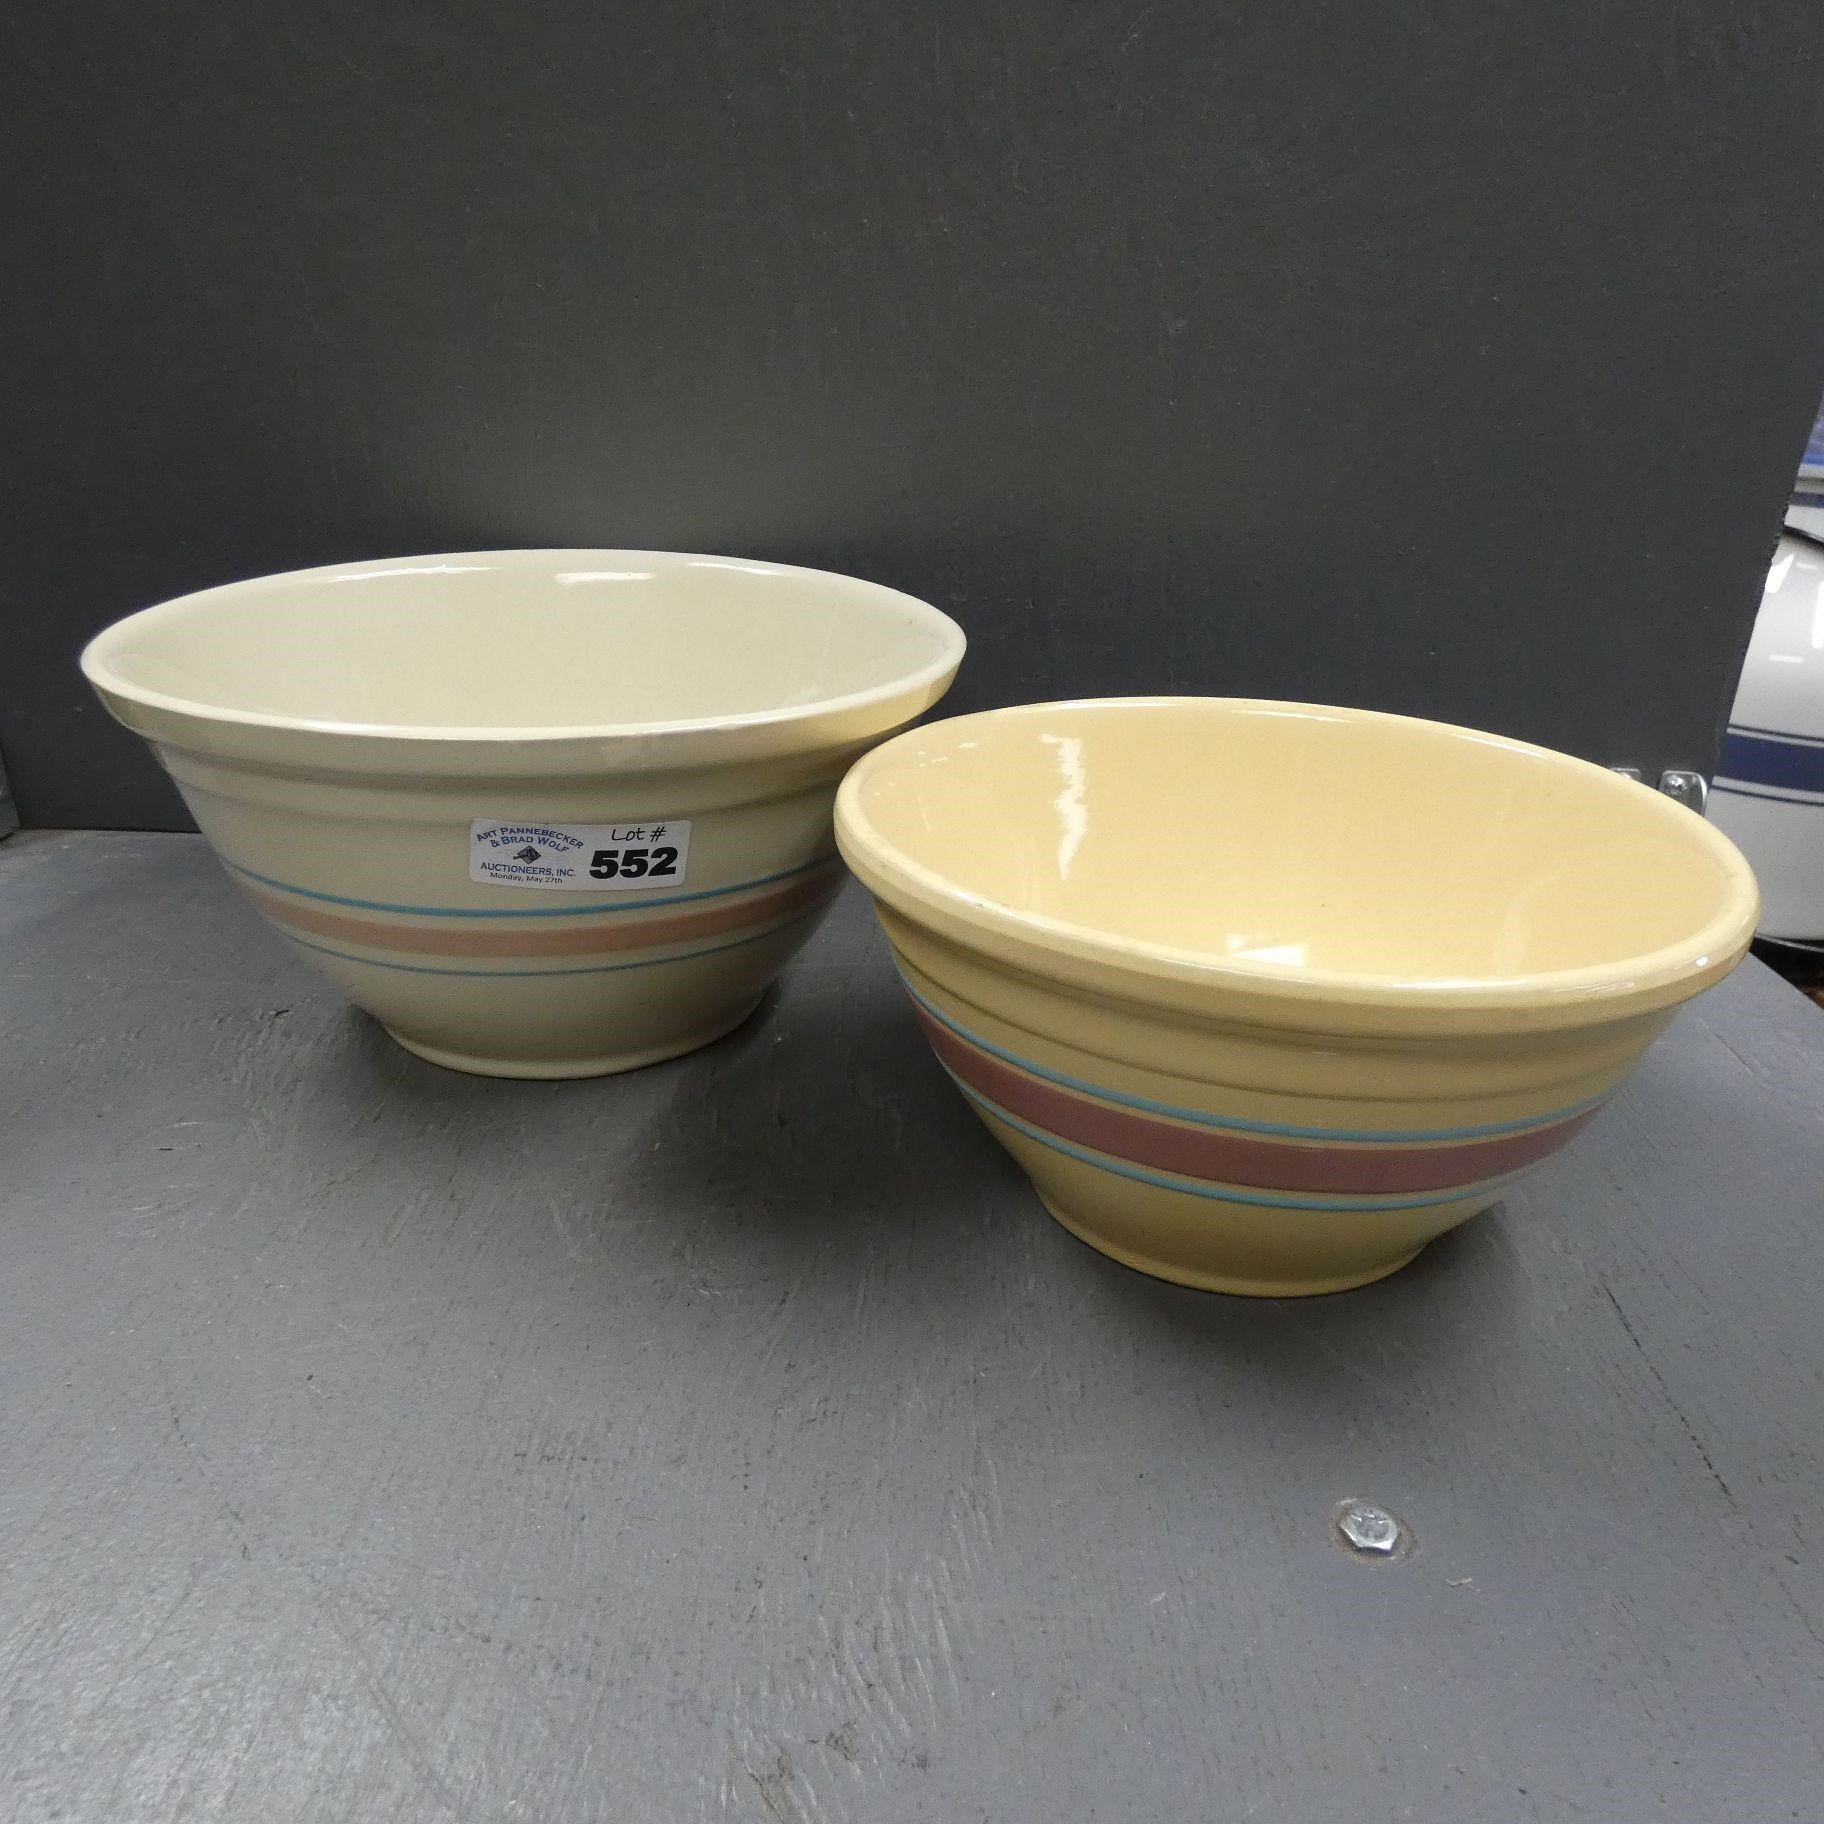 (2) Early Banded Mixing Bowls